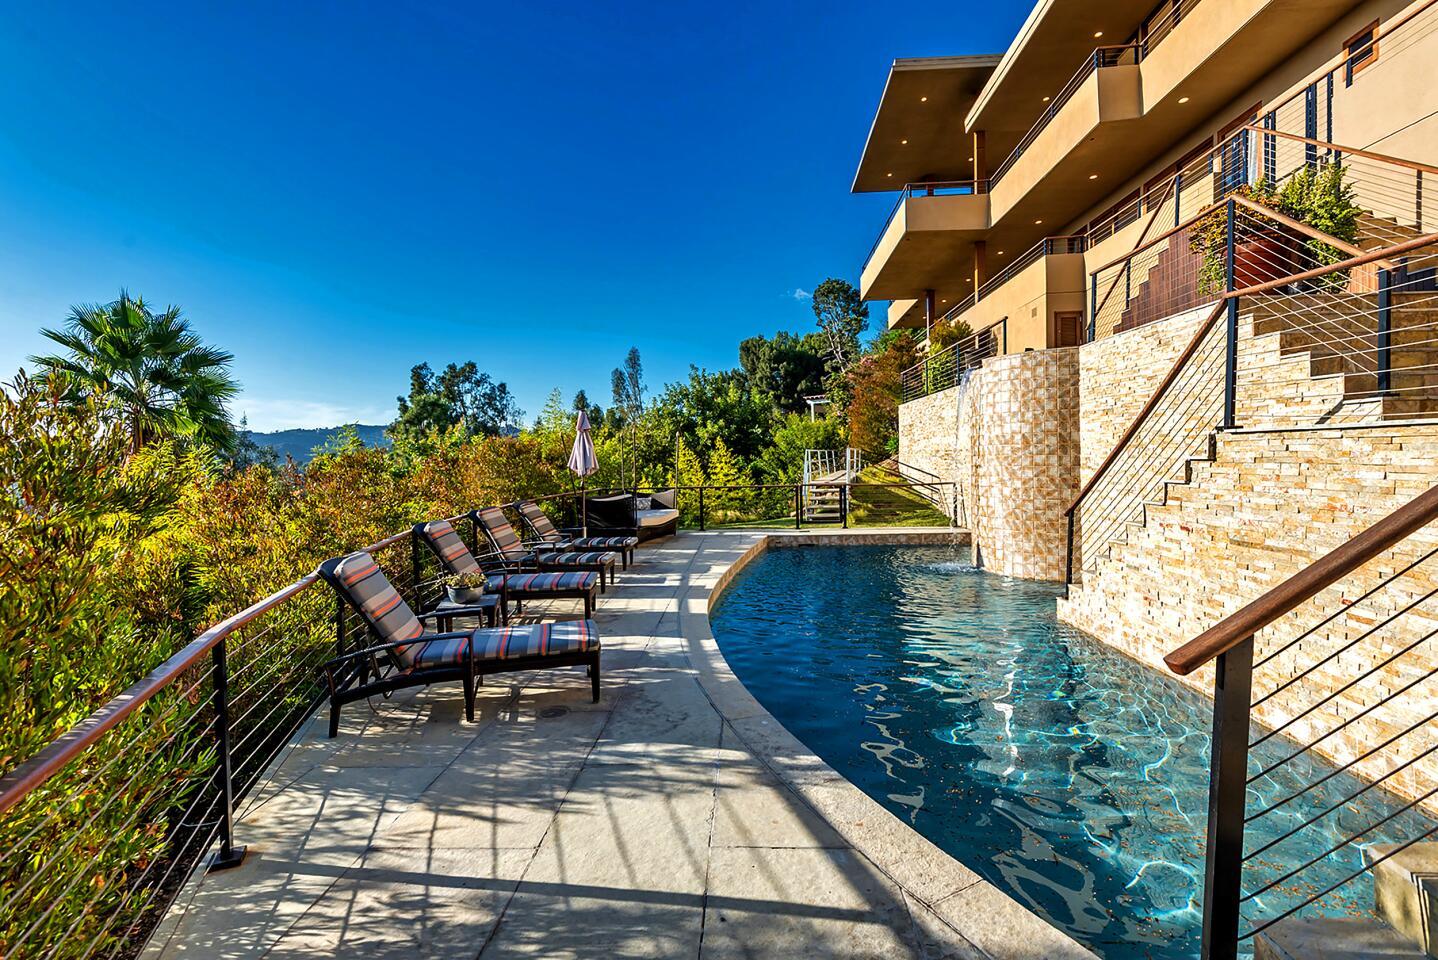 A deck with lounge chairs borders a narrow, rectangular pool.